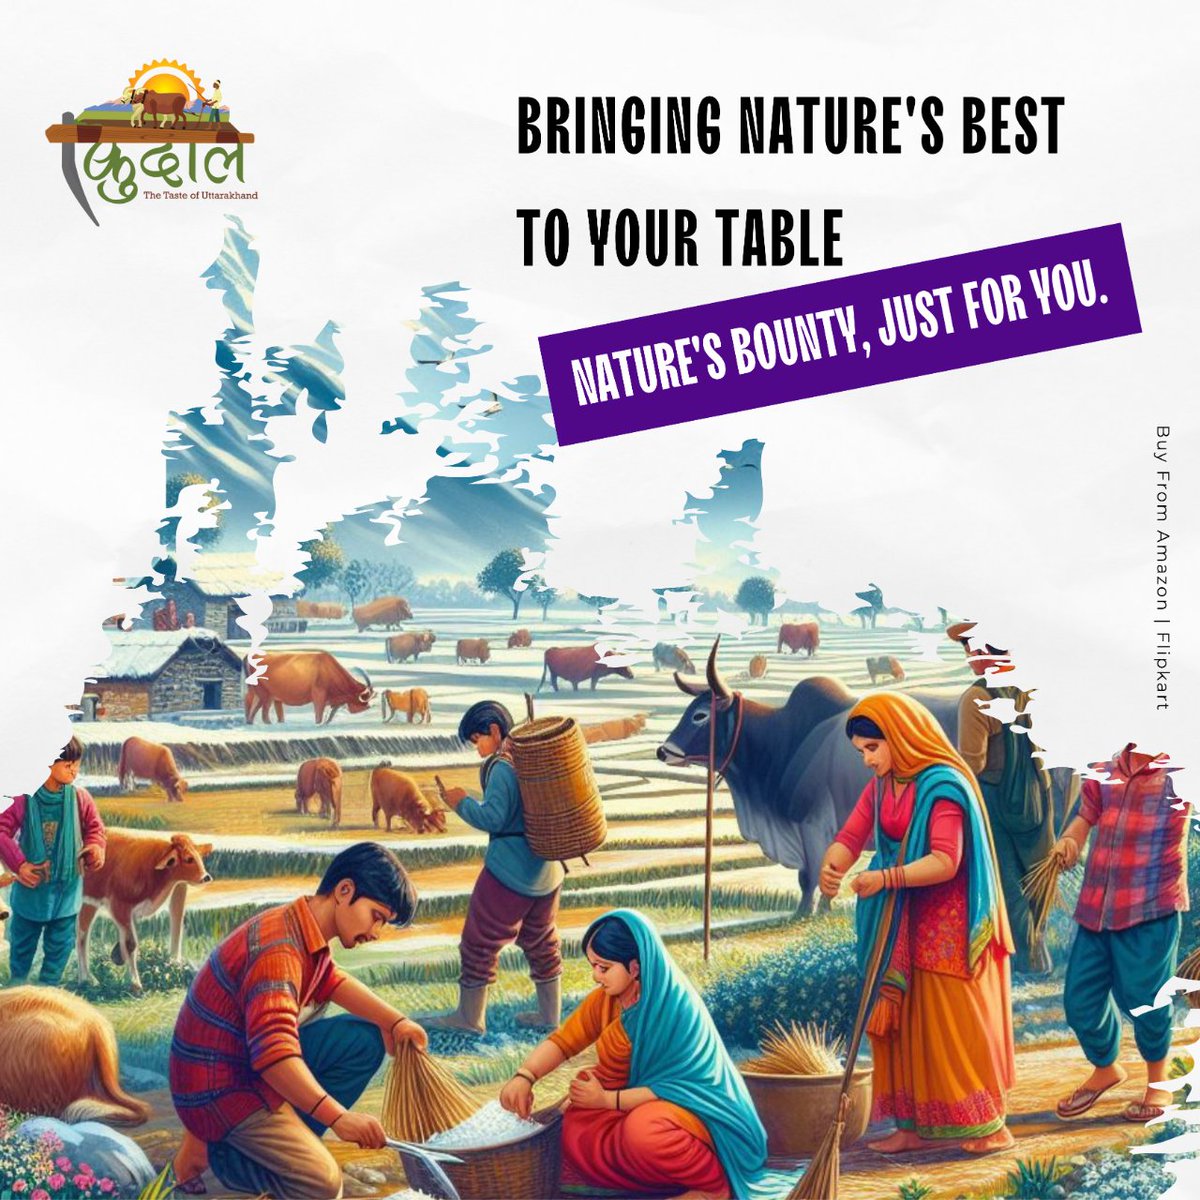 Savor the fresh taste of Uttarakhand with our handpicked products—nature's bounty, just for you.

#Uttarakhand #FreshProducts #PureNature #WholesomeLiving #NaturalGoodness #HealthyEating #Organic #SustainableLiving #FarmToTable #EcoFriendly